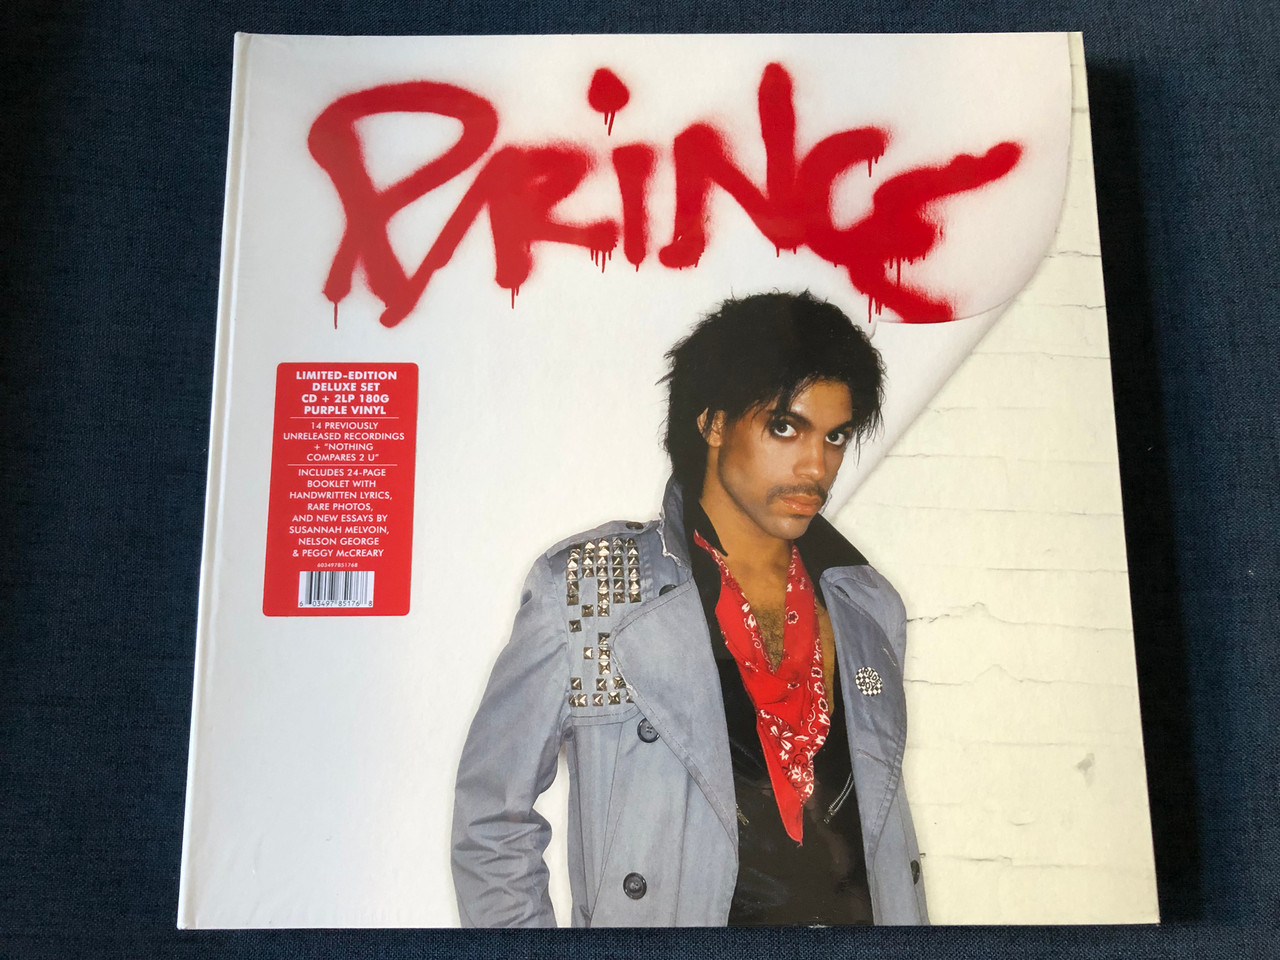 oprindelse Certifikat Indigenous Prince – Originals / Limited-Edition Deluxe Set CD + 2 LP 180G Purple Vinyl  / 14 Previously Unreleased Recordings + ''Nothing Compares 2 U'' / Includes  24-Page Booklet With Handwritten Lyrics / NPG Records Audio CD + 2x LP 2019  / 603497851768 ...